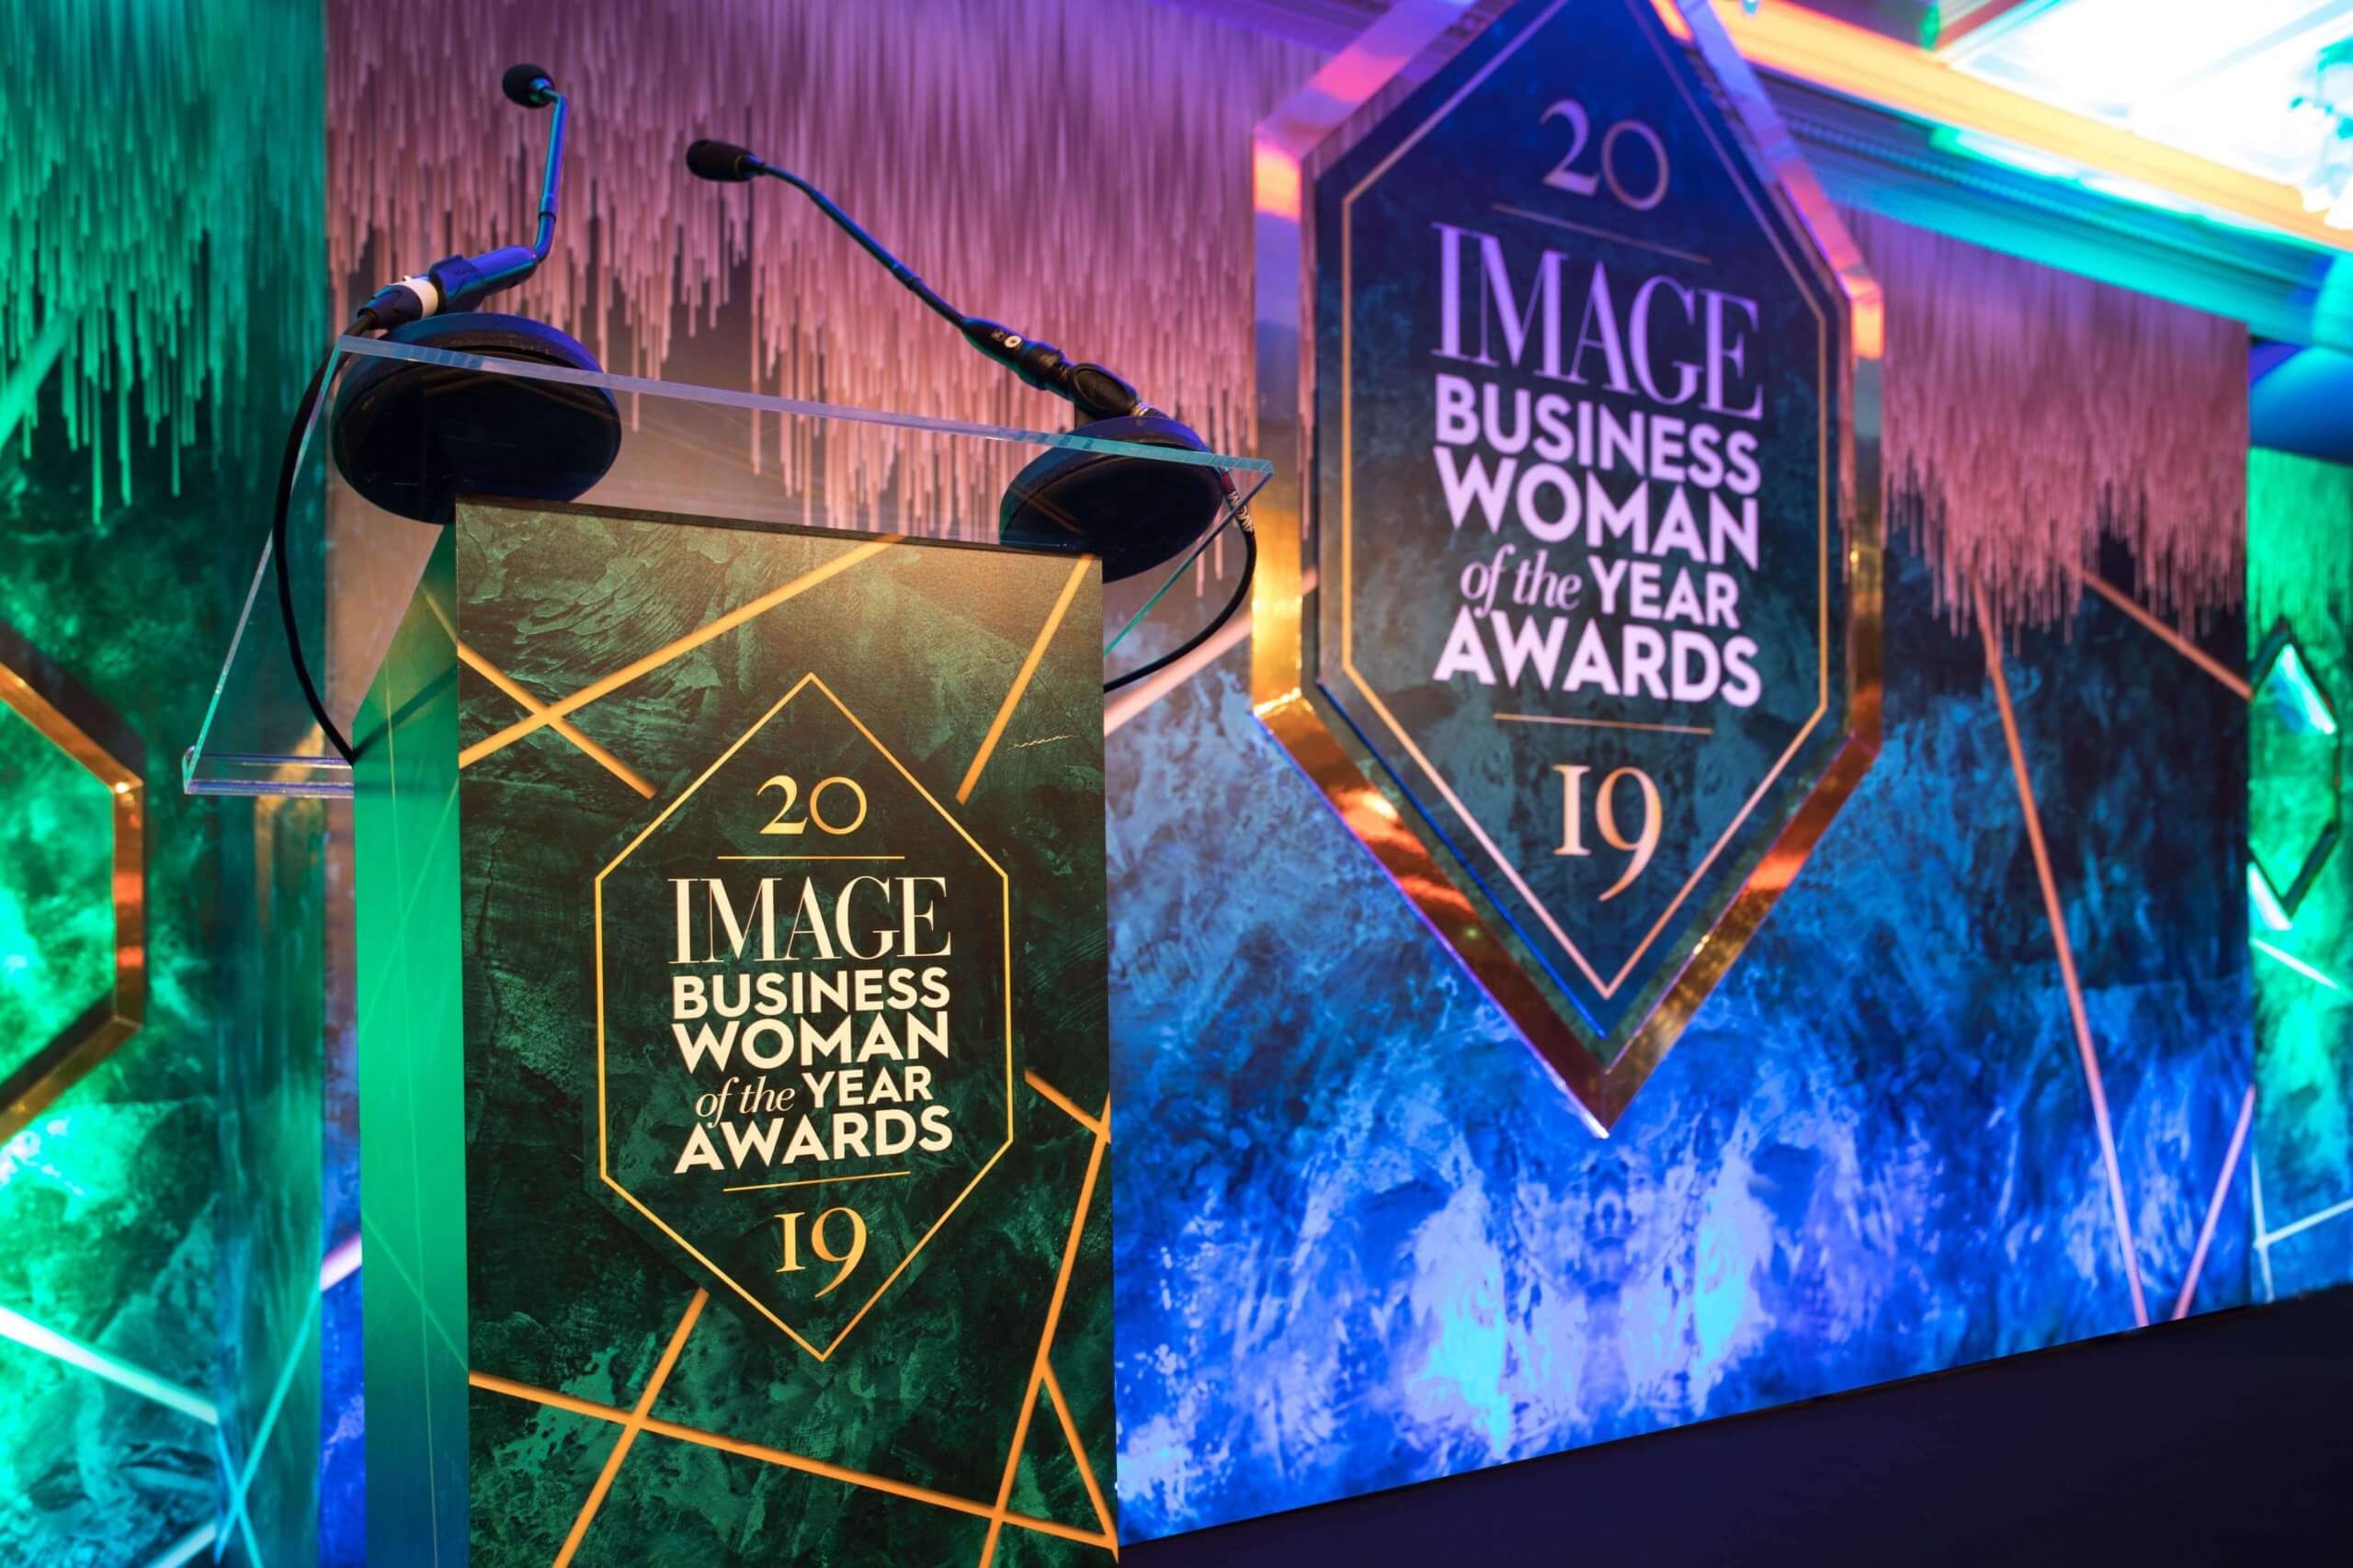 IMAGE Business Woman of the Year 2019